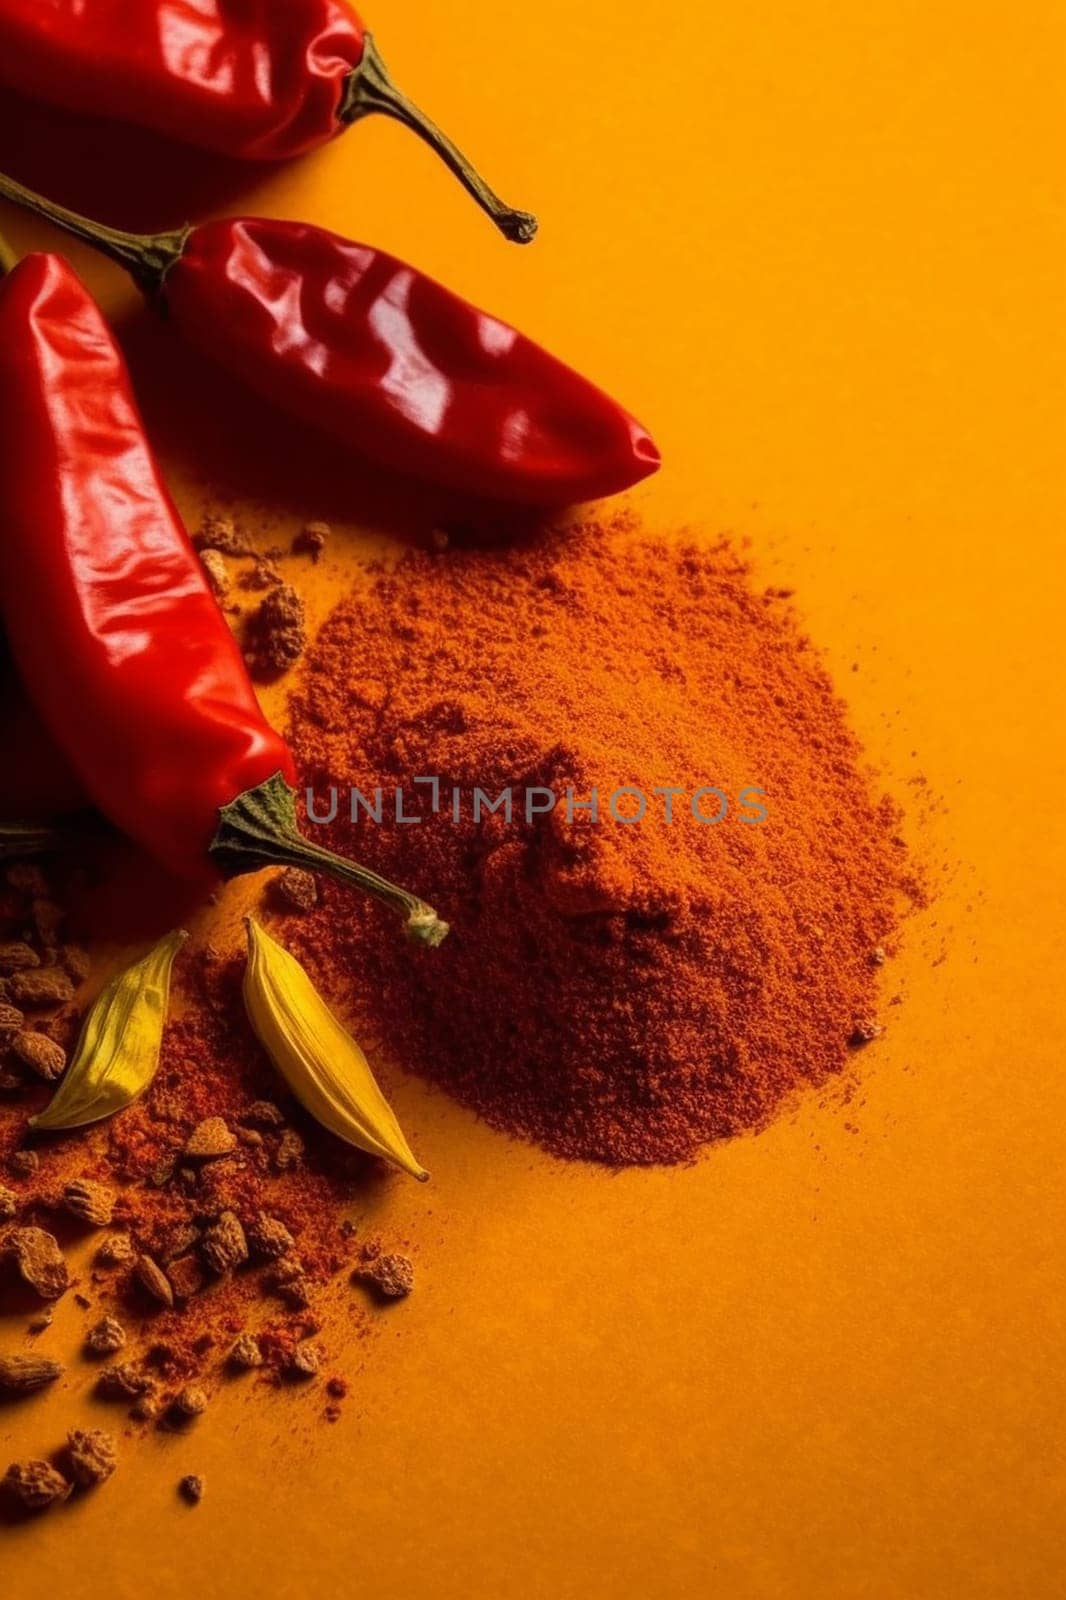 Red chili peppers and powder on a vibrant orange background. by Hype2art